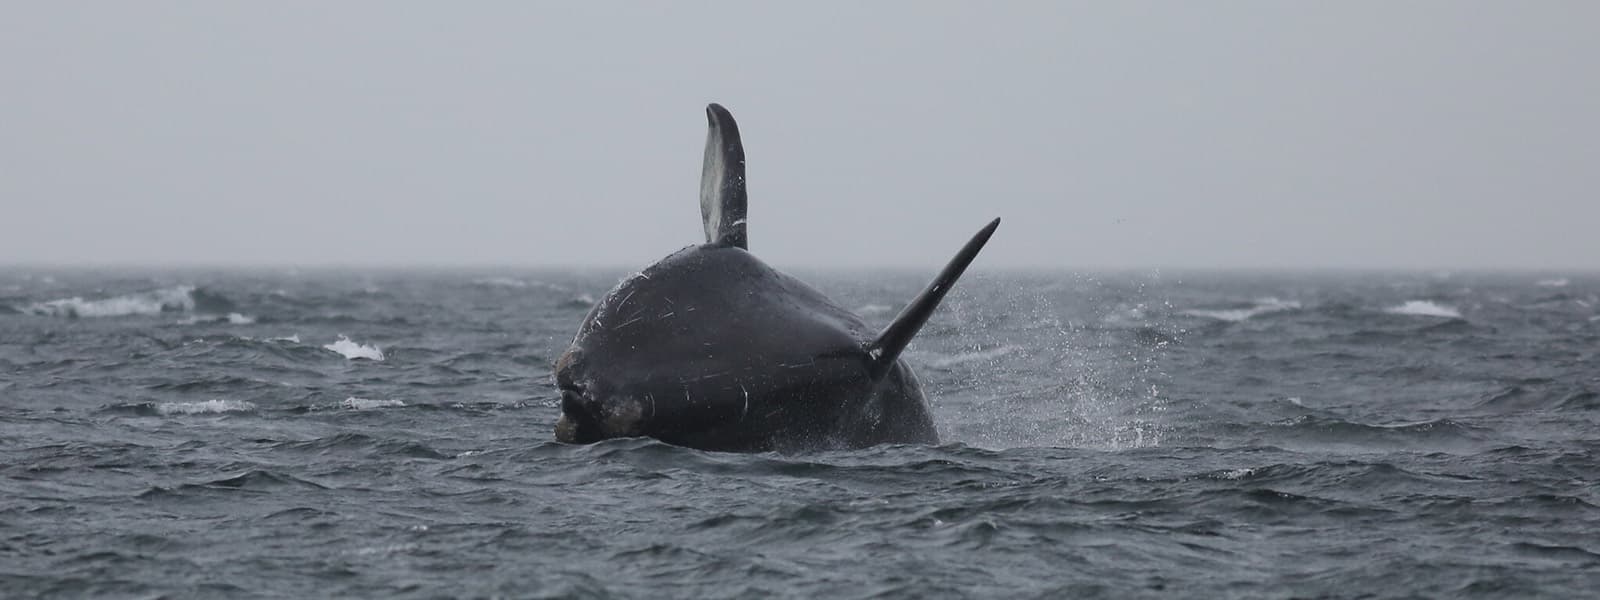 right whale breaching